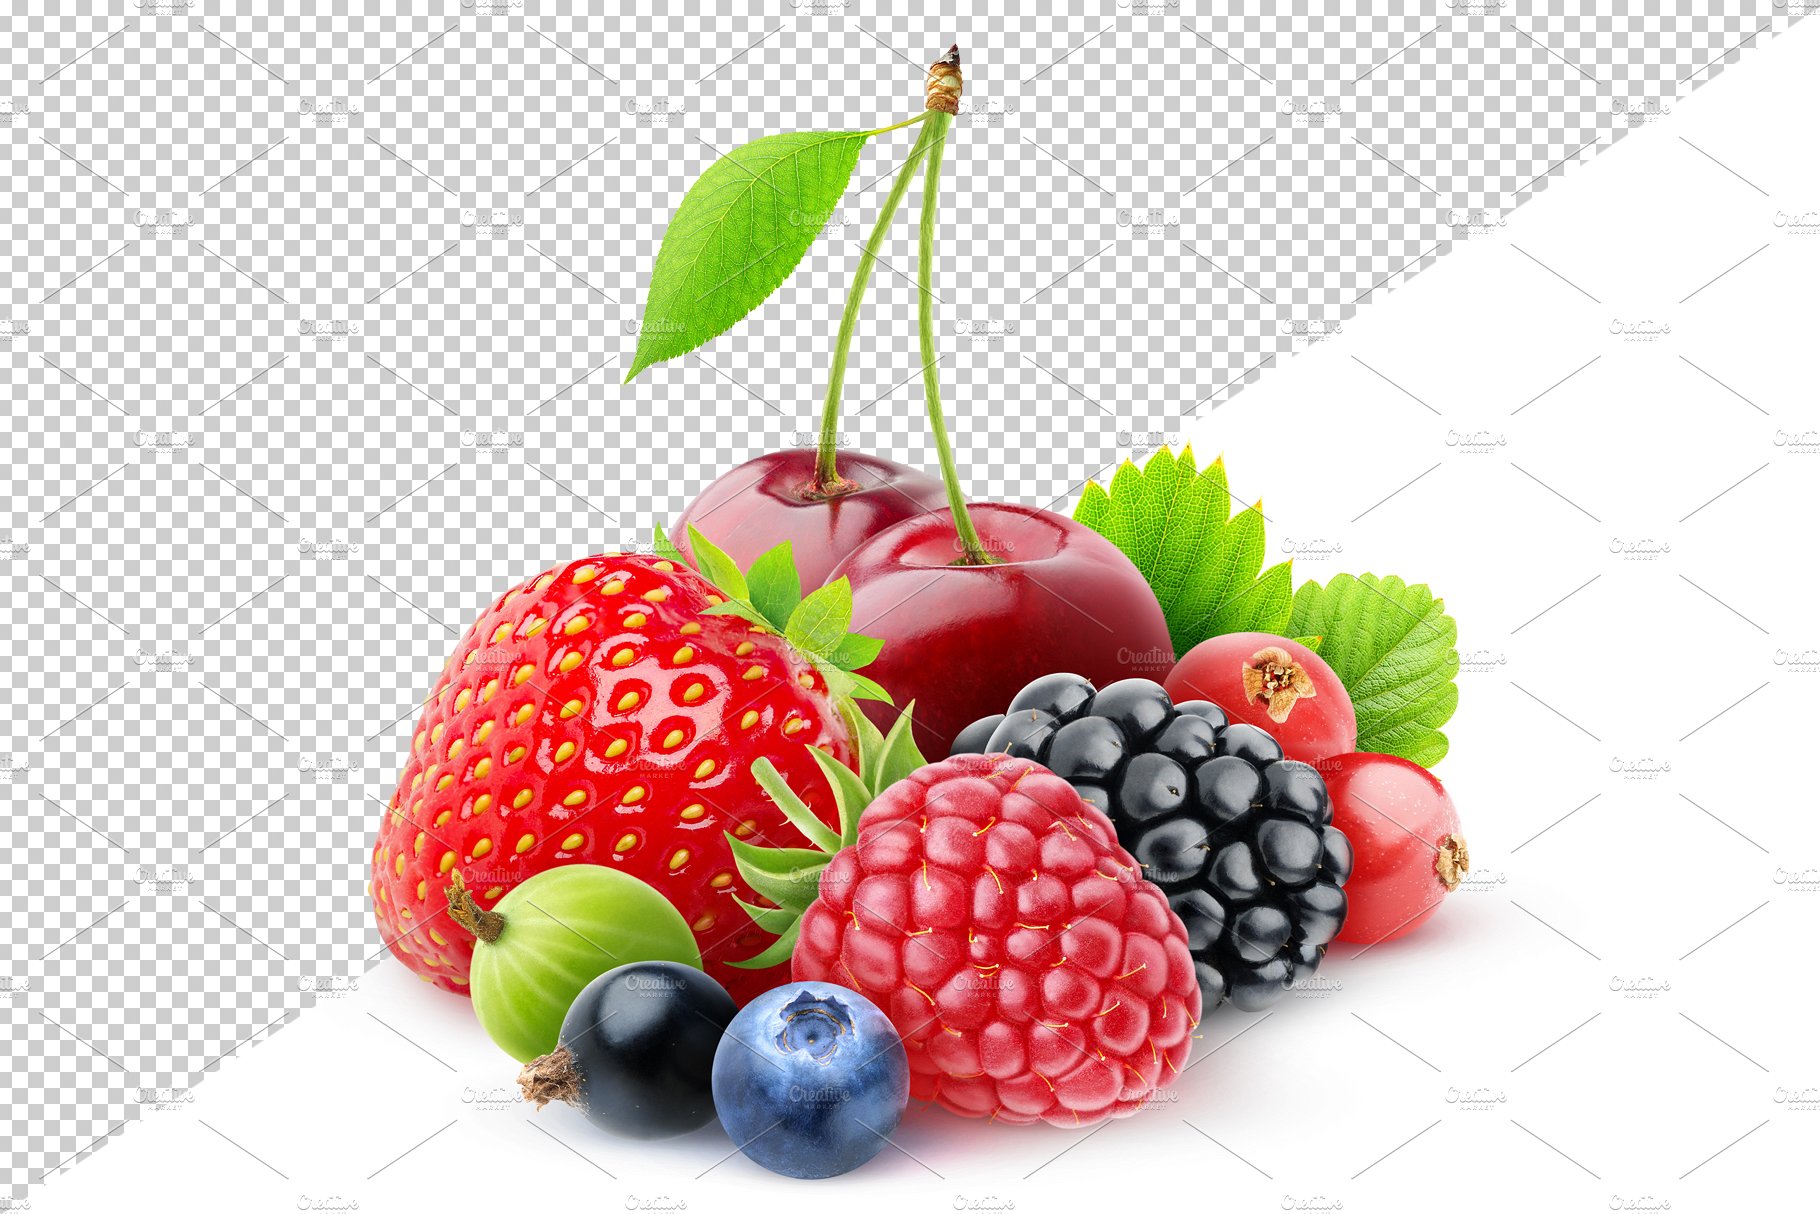 Berries in a pile preview image.